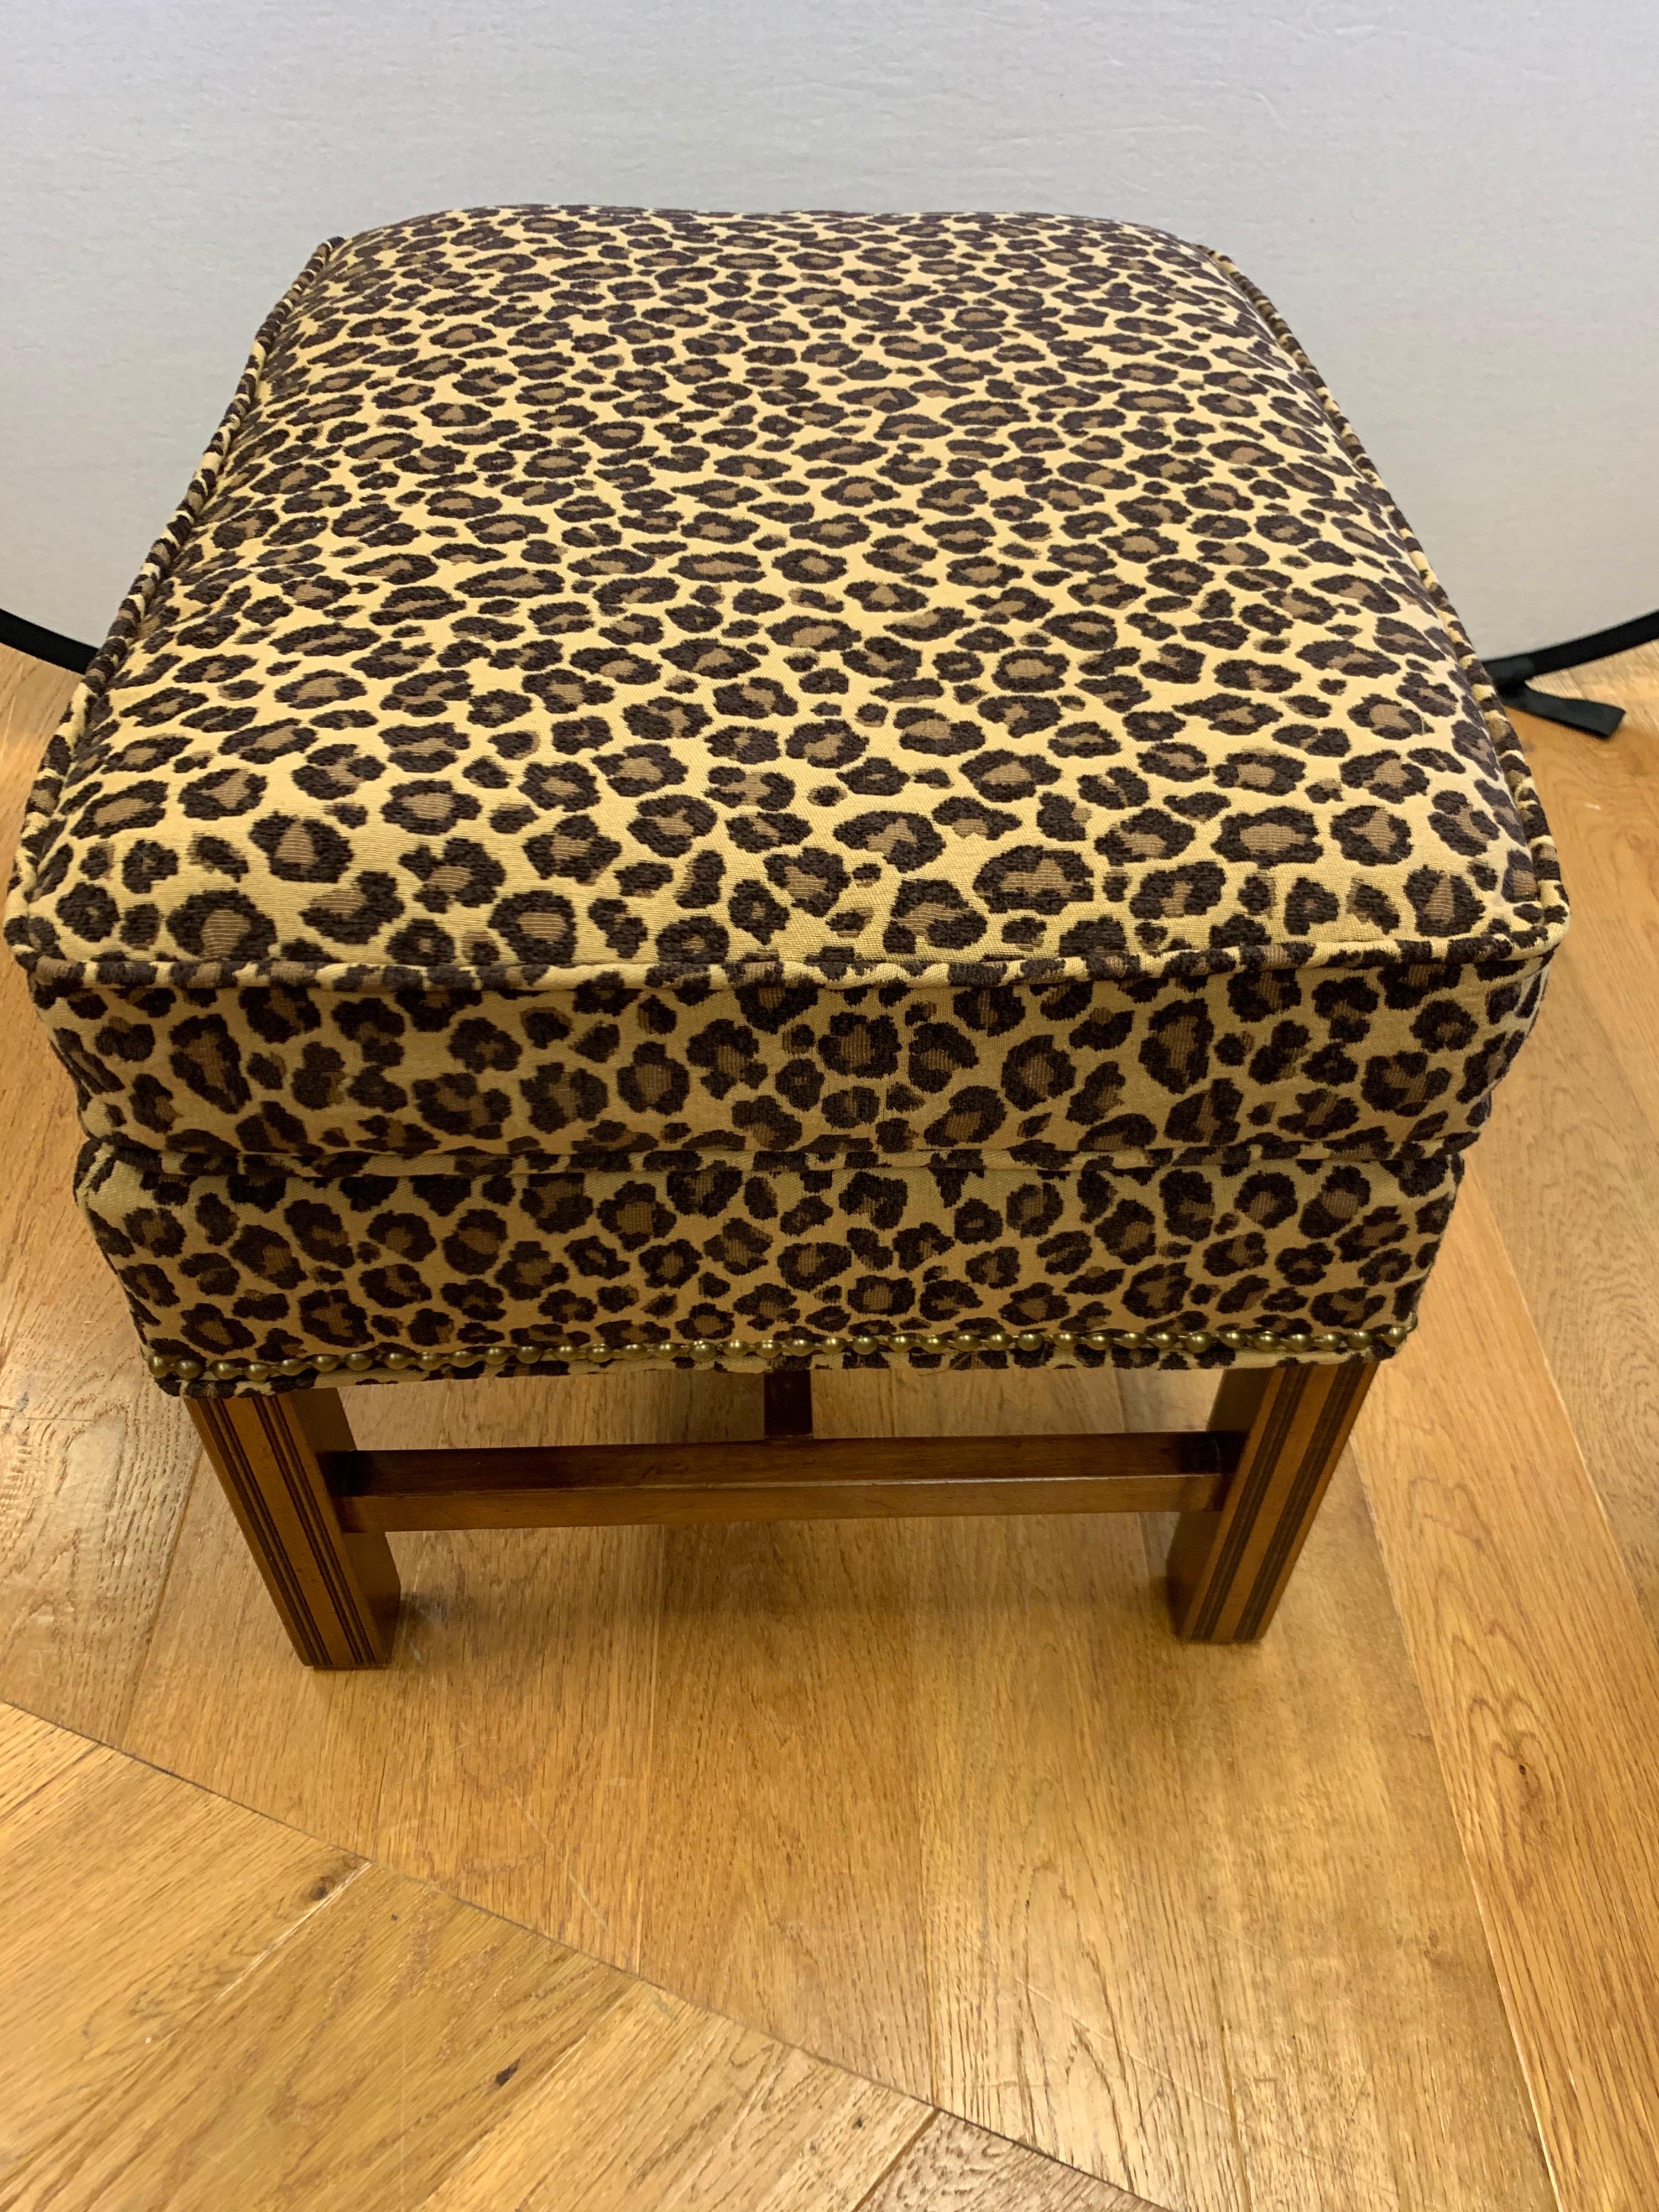 Pair of Berhardt Leopard Print Ottomans Stools Nailhead Newly Upholstered 7